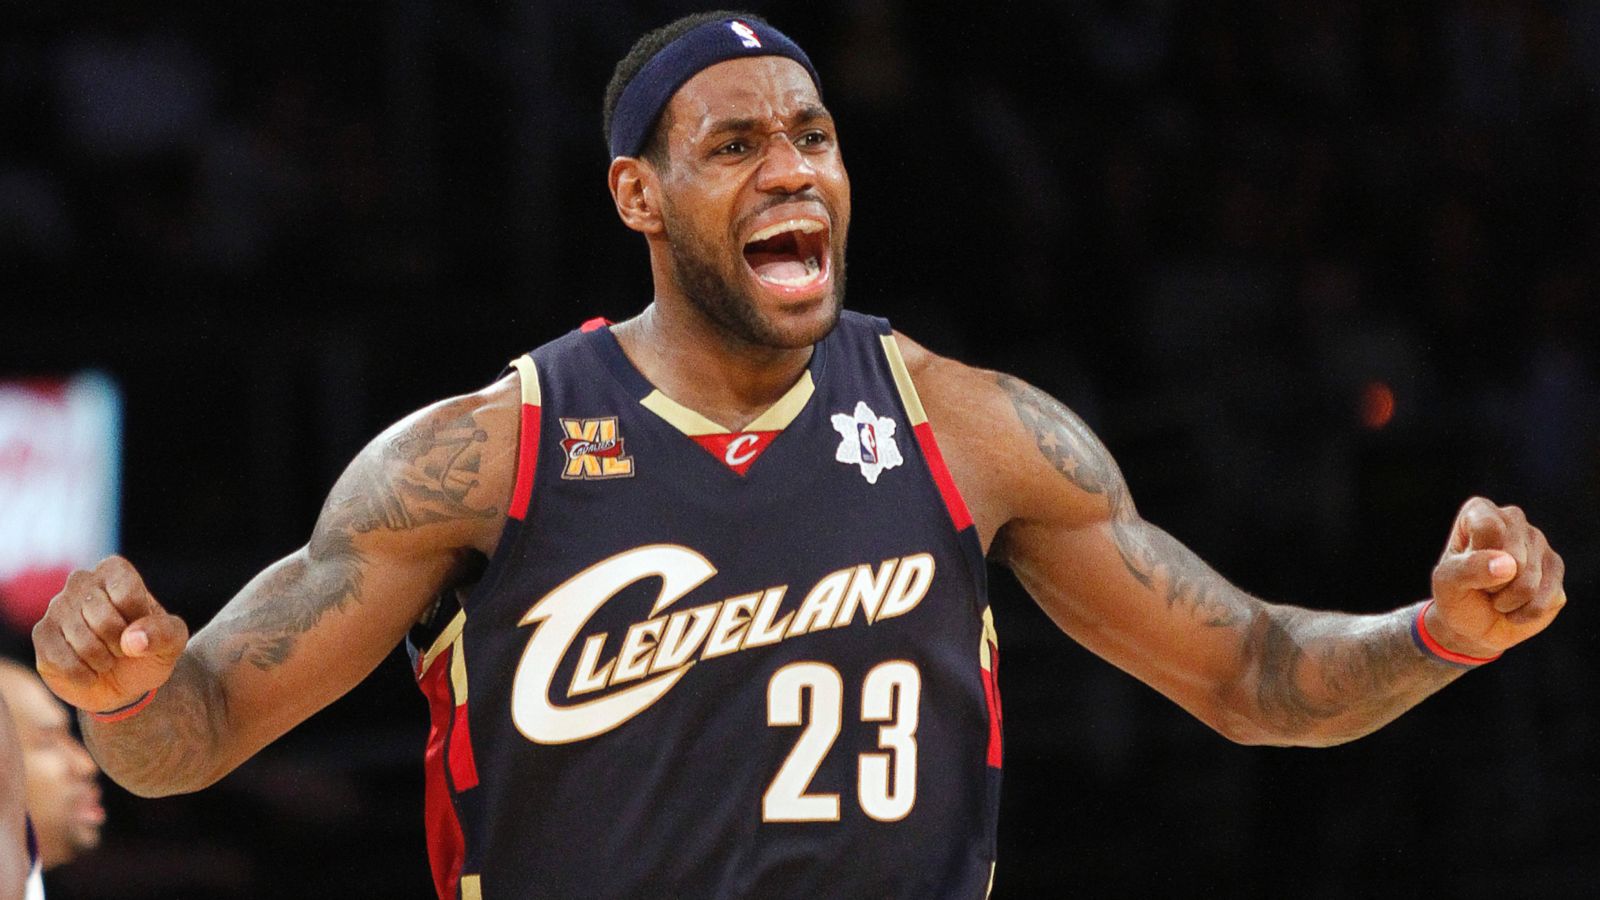 Lebron James to opt out with Cavs, become free agent, Basketball